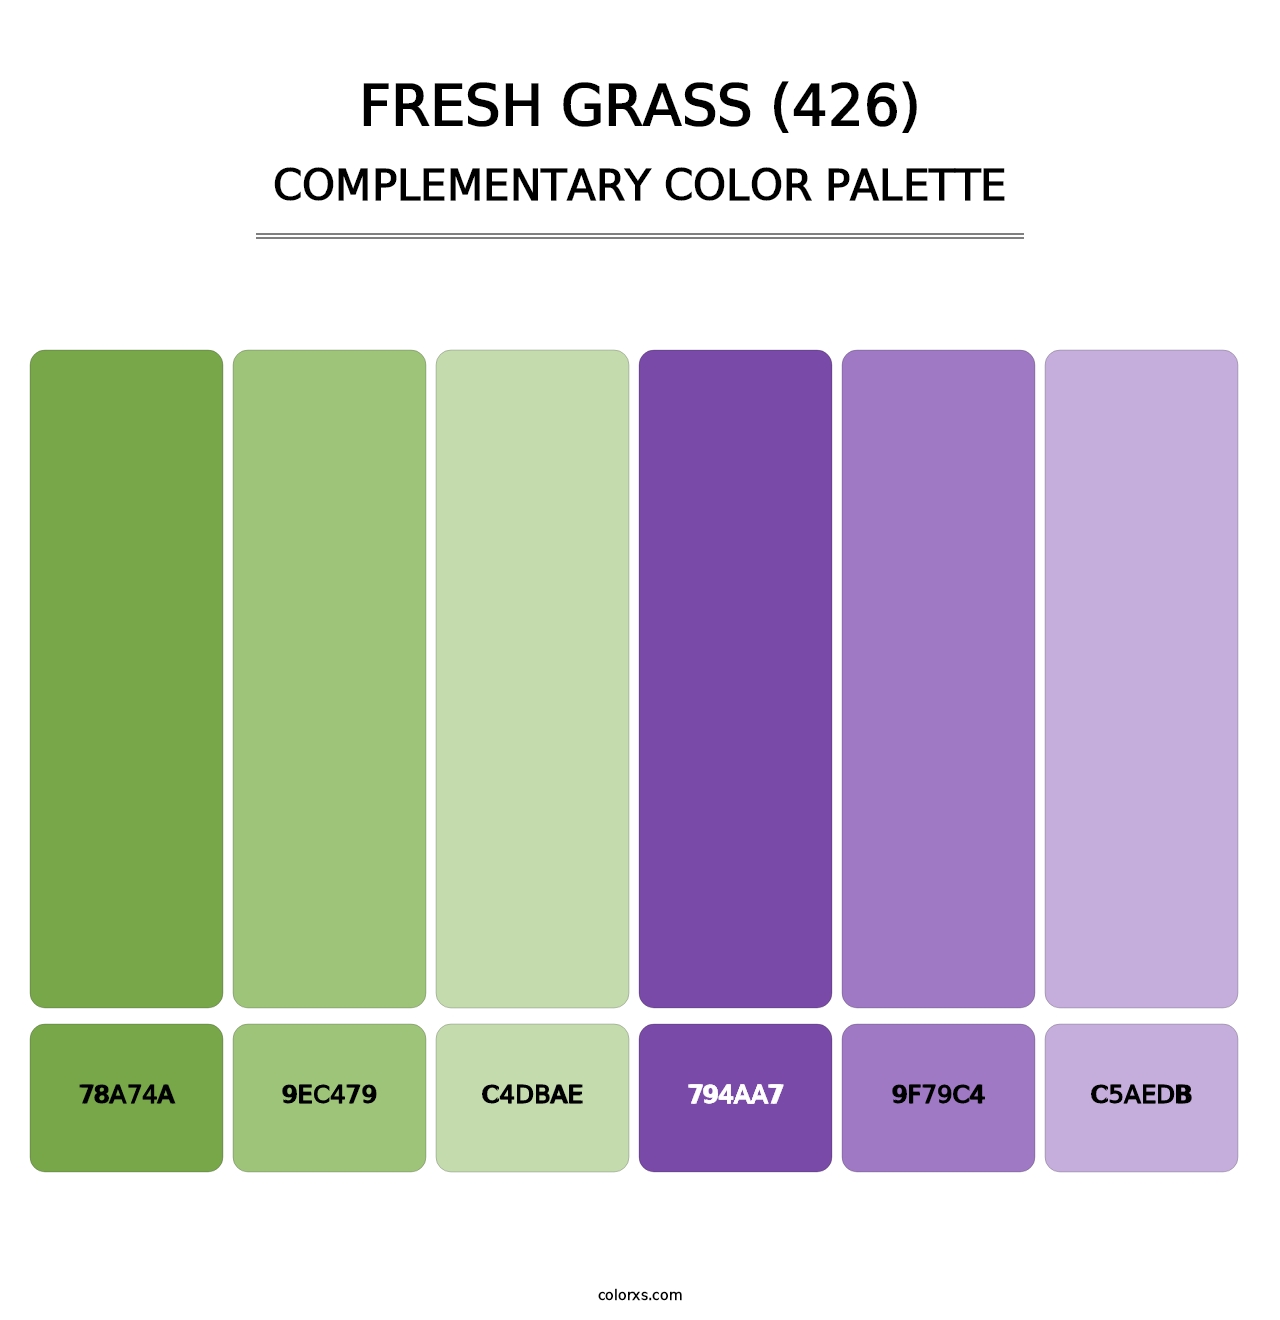 Fresh Grass (426) - Complementary Color Palette